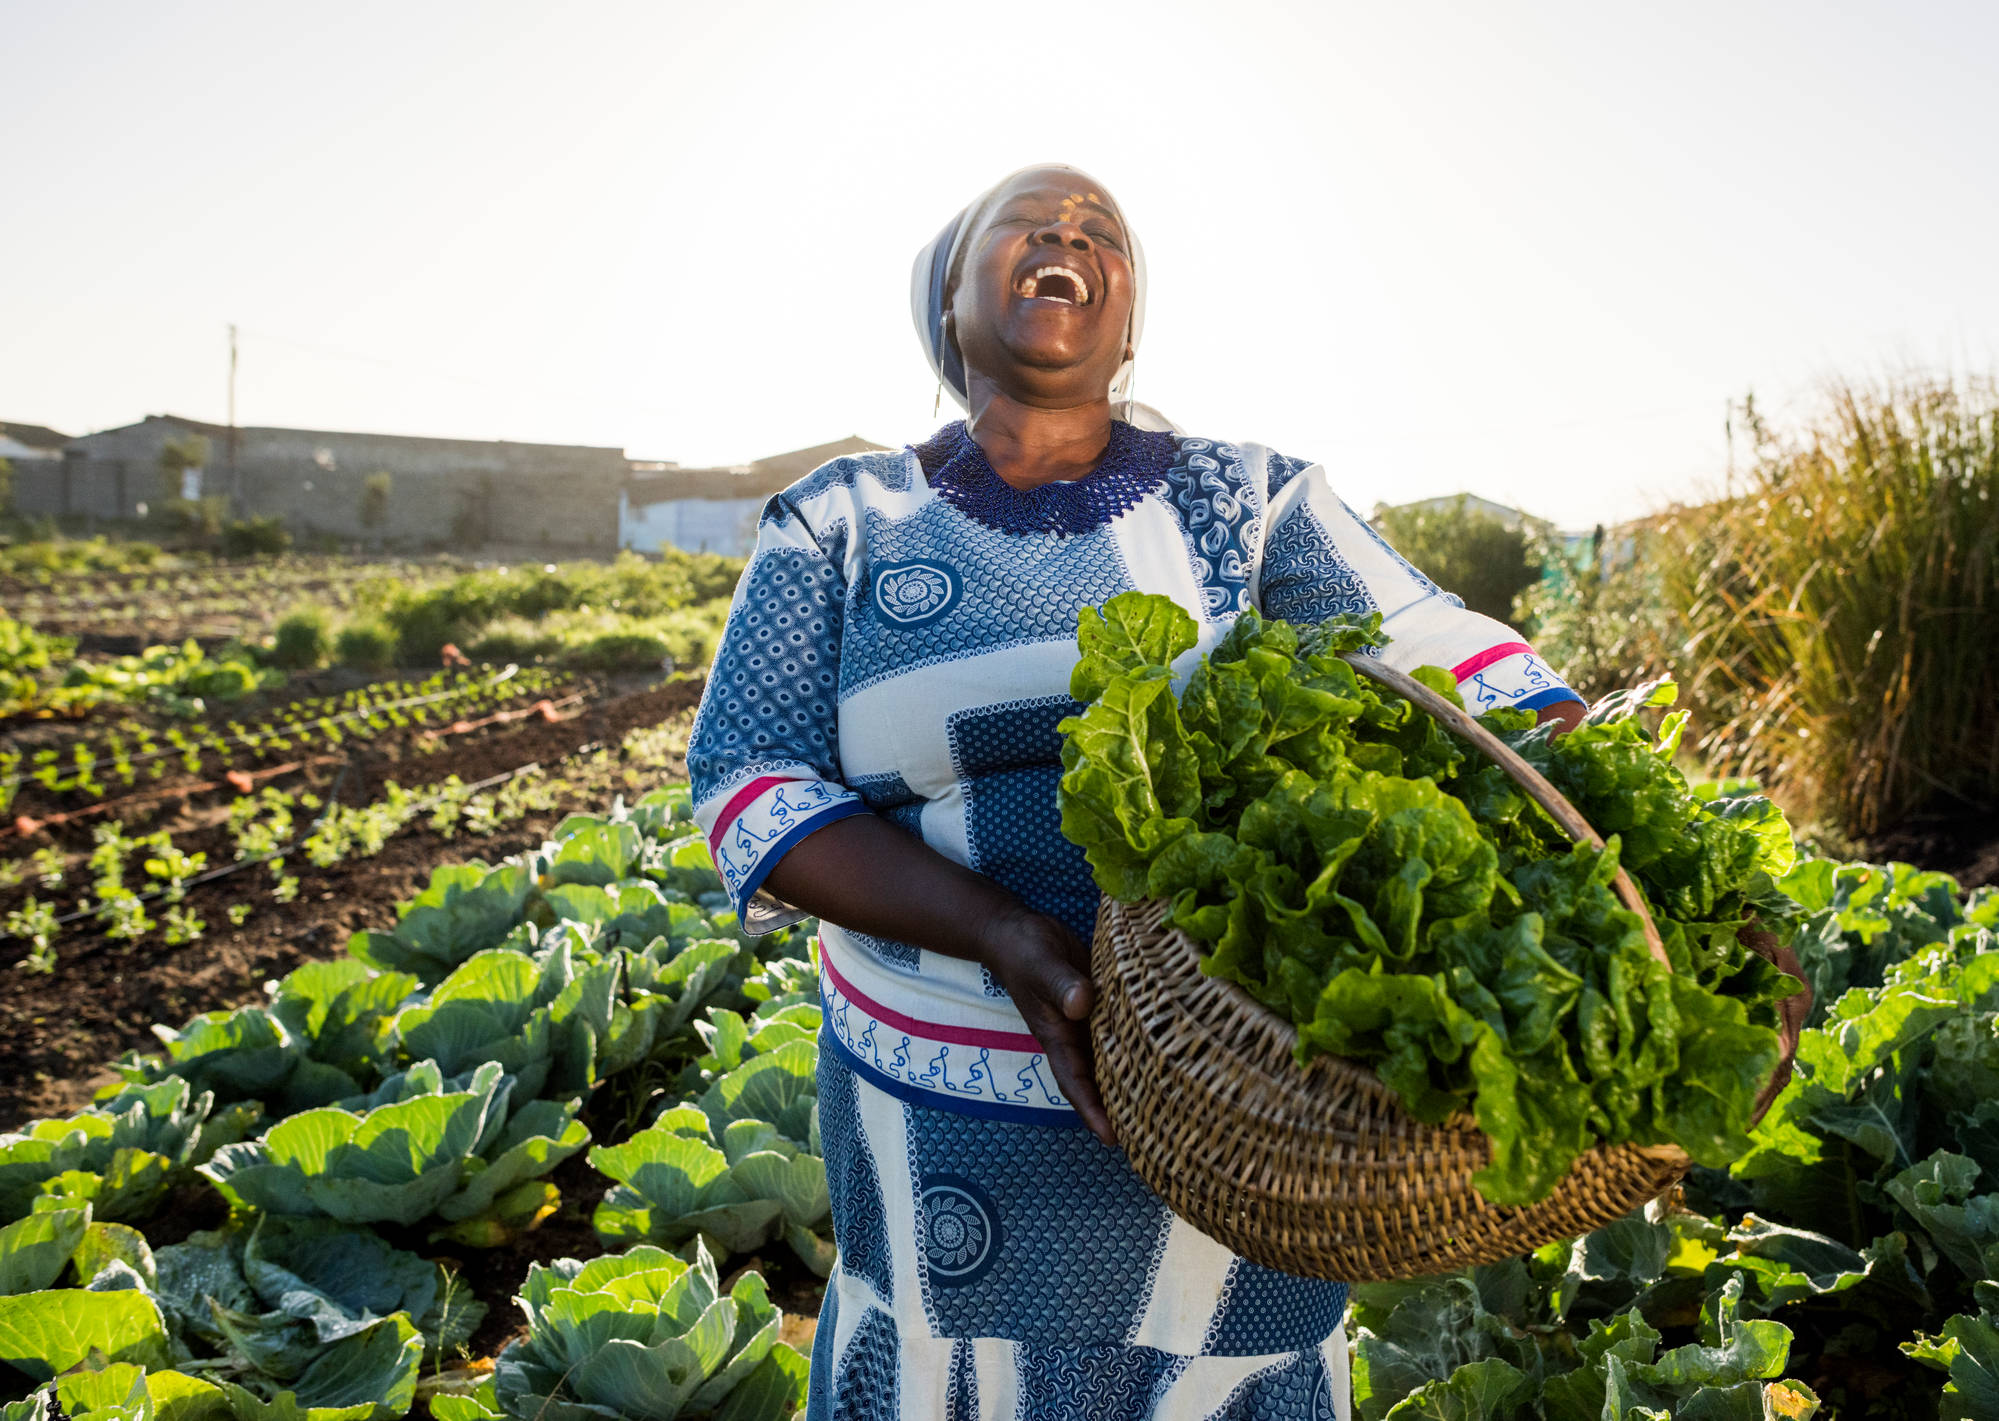 Africa: Researchers Call for Gender-Friendly Crop Varieties to Aid Food Security